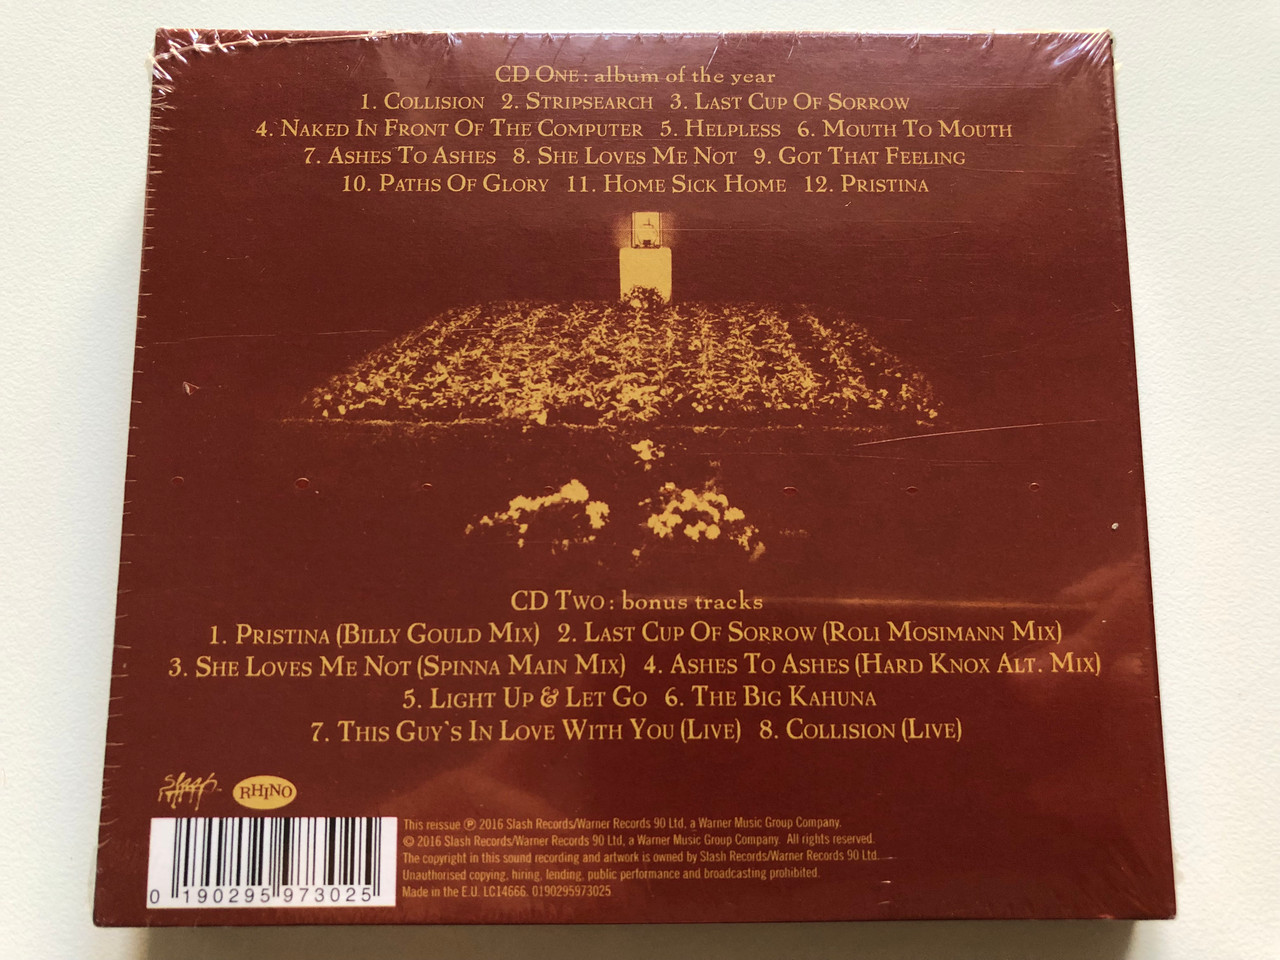 https://cdn10.bigcommerce.com/s-62bdpkt7pb/products/0/images/212964/Faith_No_More_Album_Of_The_Year_Deluxe_Edition_Remastered_2_CD_Set._Bonus_Disc_Features_8_rare_tracks_live_versions_b-sides_New_liner_notes_Includes_Ashes_To_Ashes_Stripscarch___38812.1644816862.1280.1280.JPG?c=2&_gl=1*tbrm0v*_ga*MjA2NTIxMjE2MC4xNTkwNTEyNTMy*_ga_WS2VZYPC6G*MTY0NDgxNTg1OC4yODUuMS4xNjQ0ODE2NjA4LjIz